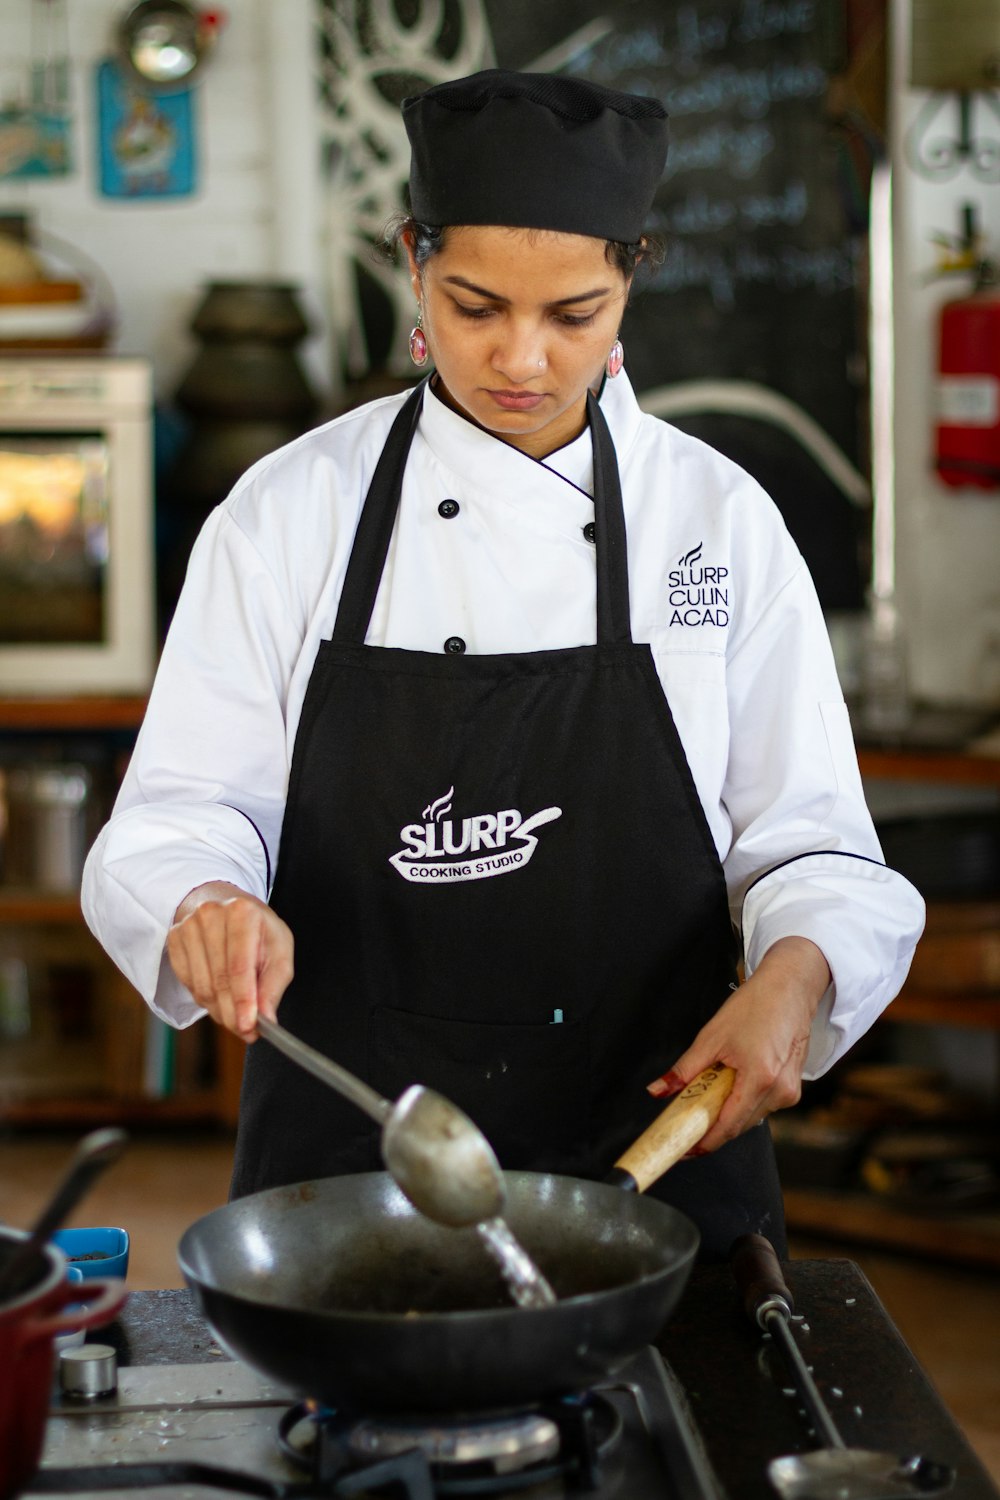 a woman in a chef's uniform cooking food on a stove